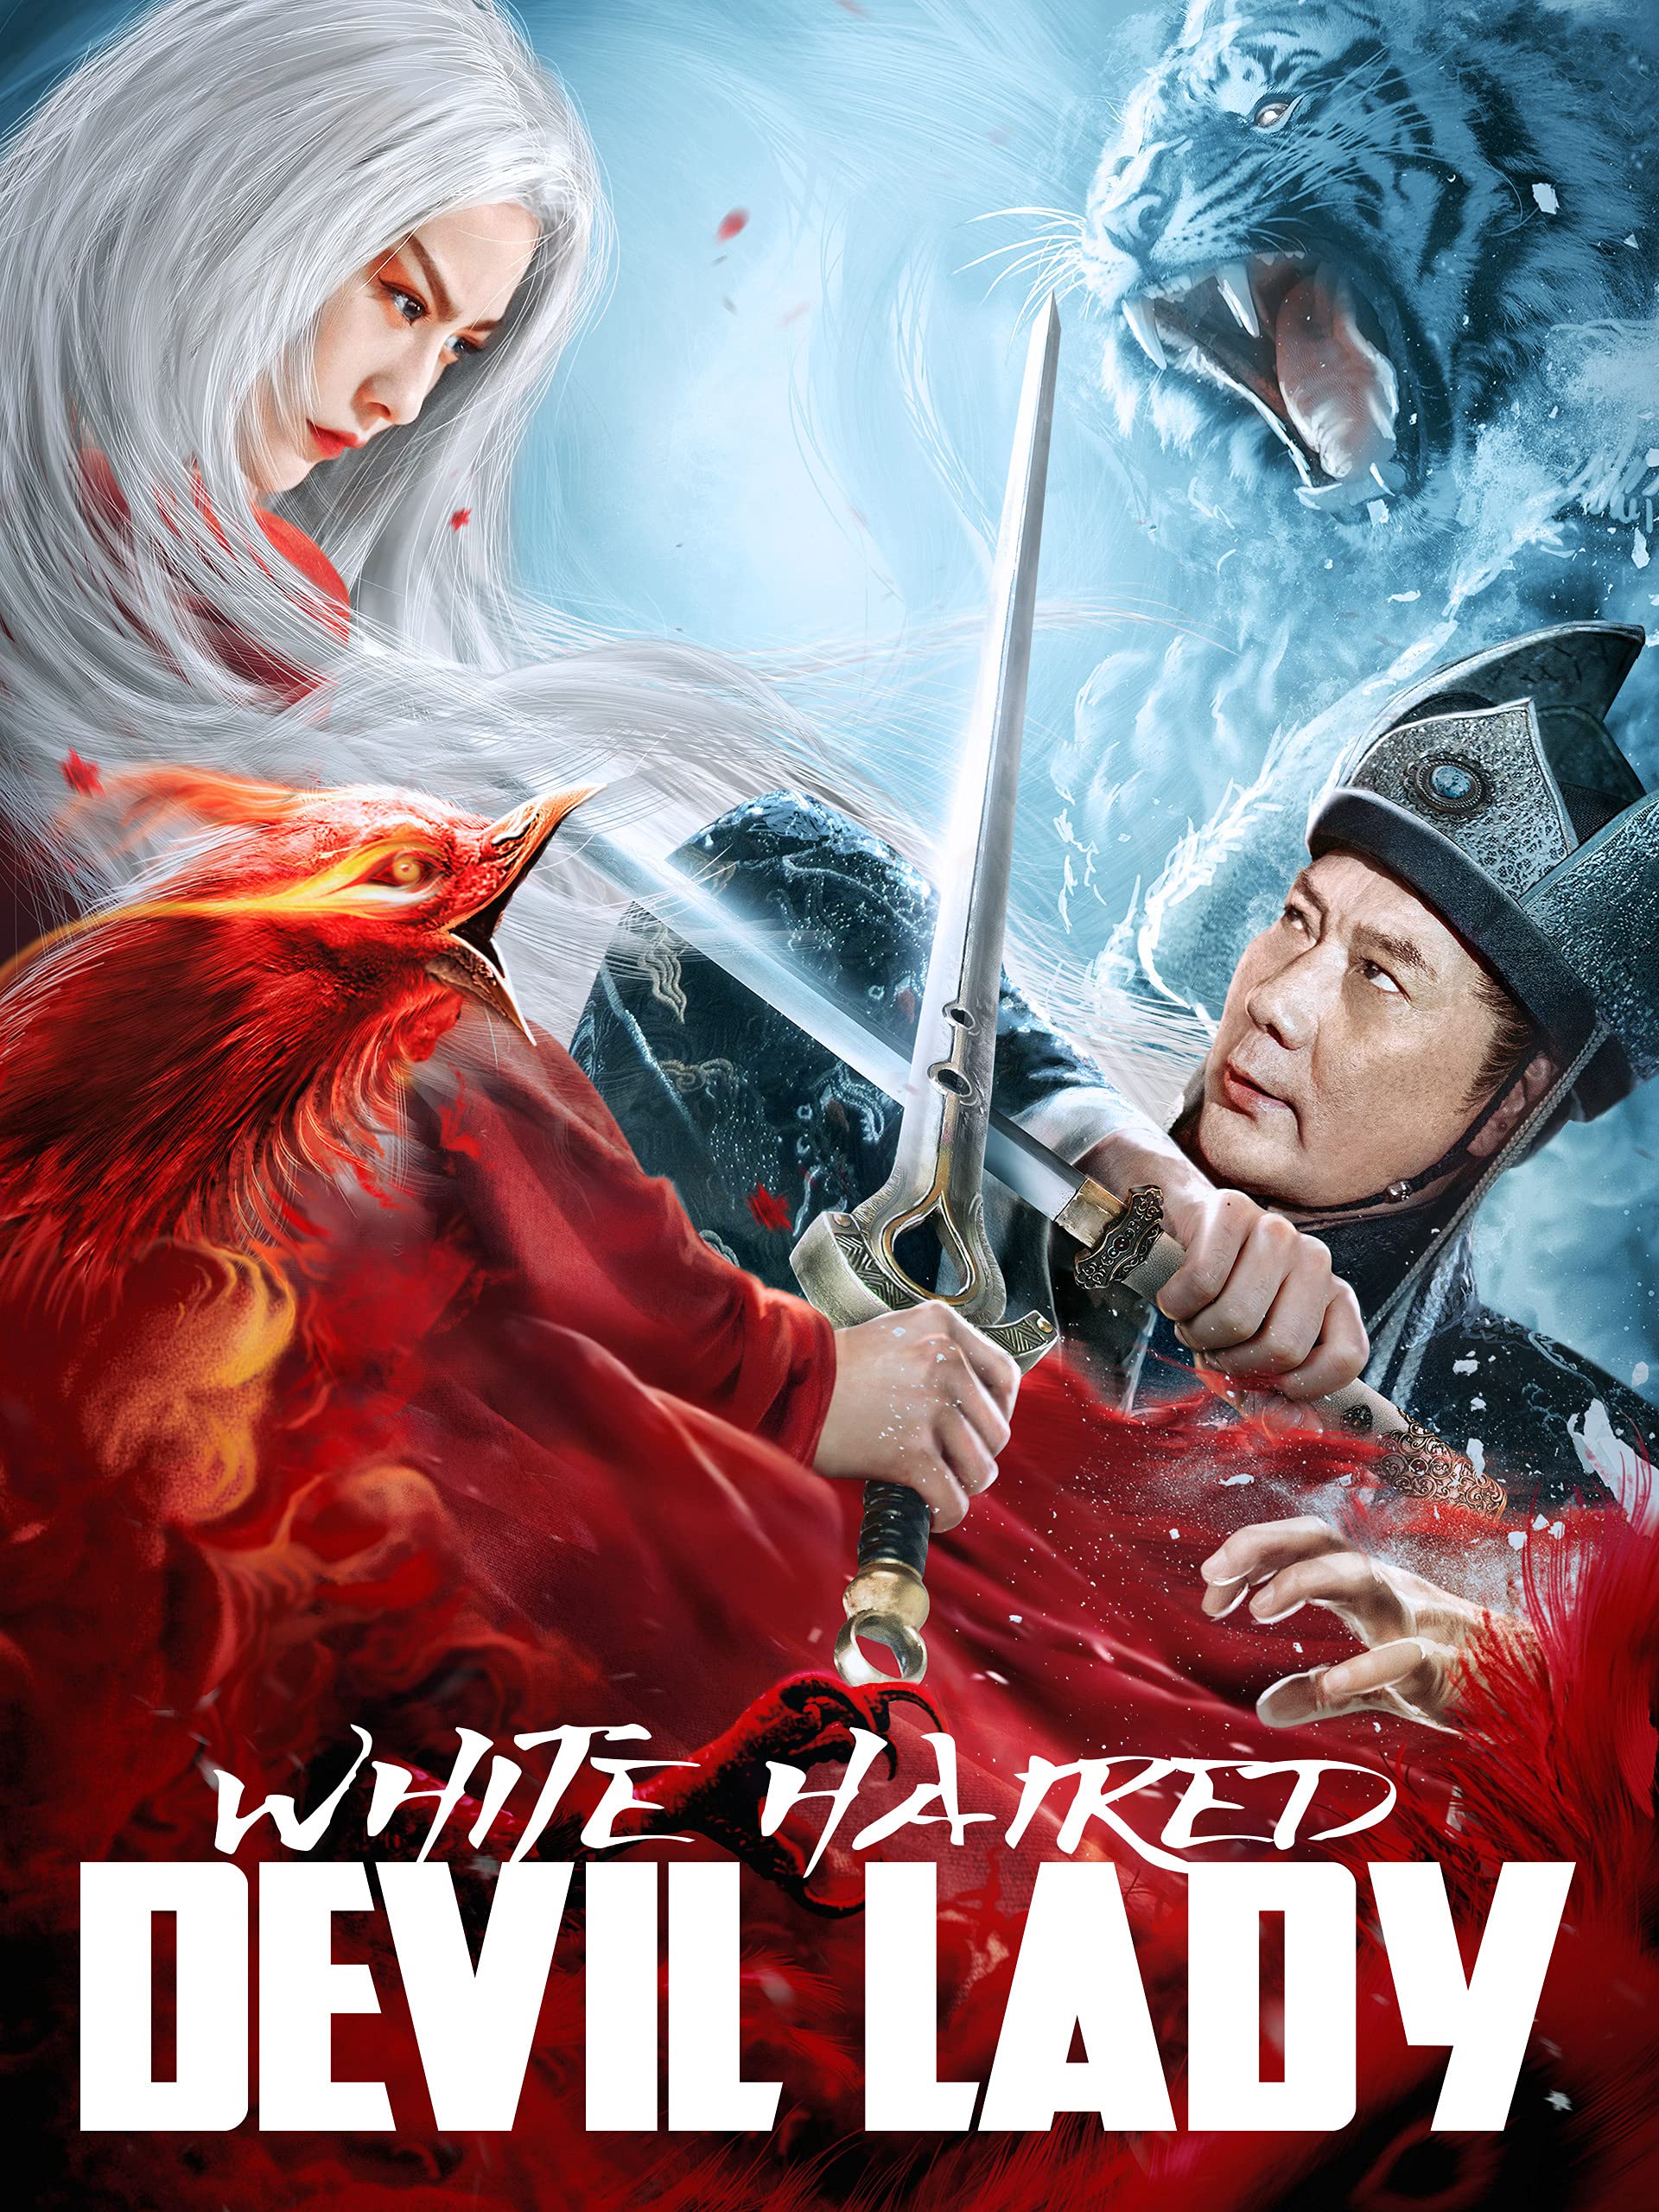 White Haired Devil Lady 2020 Hindi ORG Dual Audio 480p HDRip 264MB Download